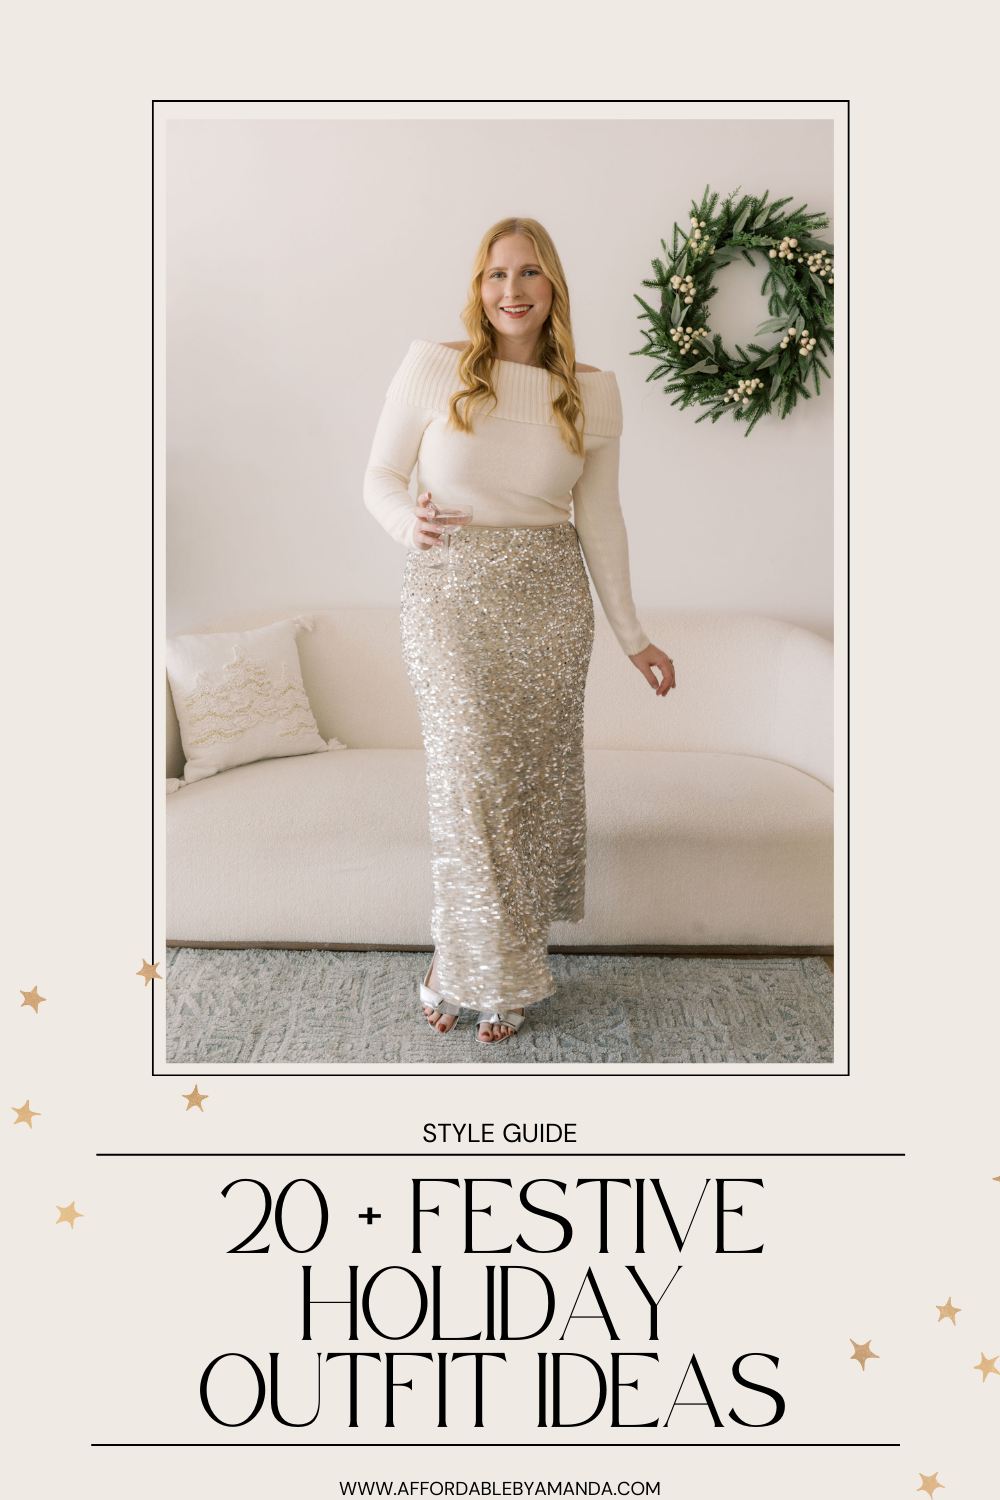 Cute Holiday Outfits to Shop 2023 — Best Holiday Party Outfit Ideas - 20 Festive Holiday Outfit Ideas 2023